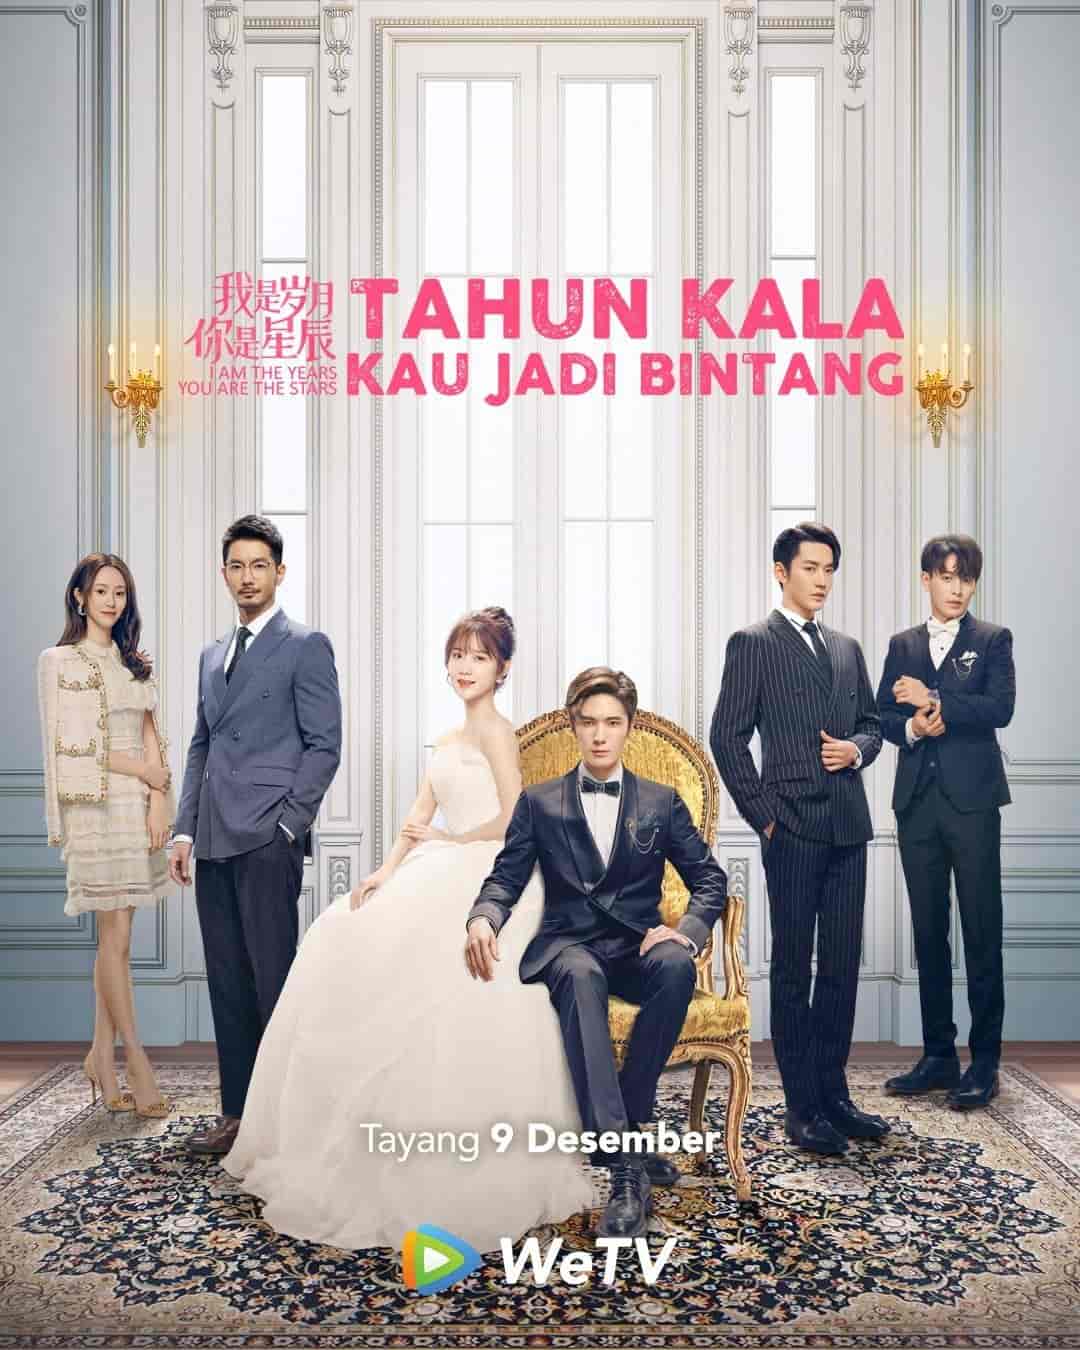 I Am the Years You Are the Stars - Sinopsis, Pemain, OST, Episode, Review